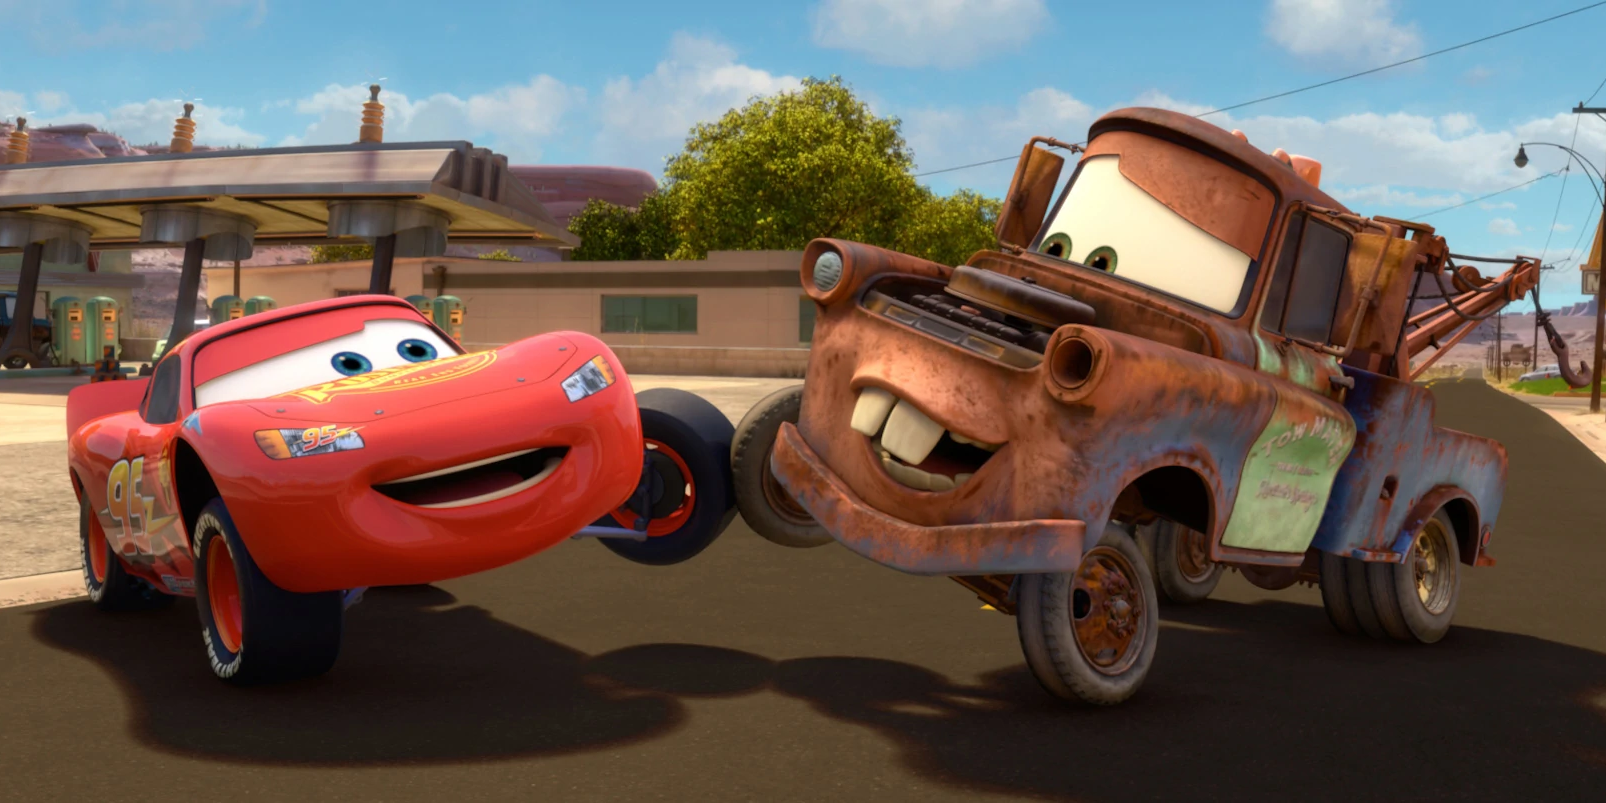 Lightning McQueen and Mater bumping wheels in Cars